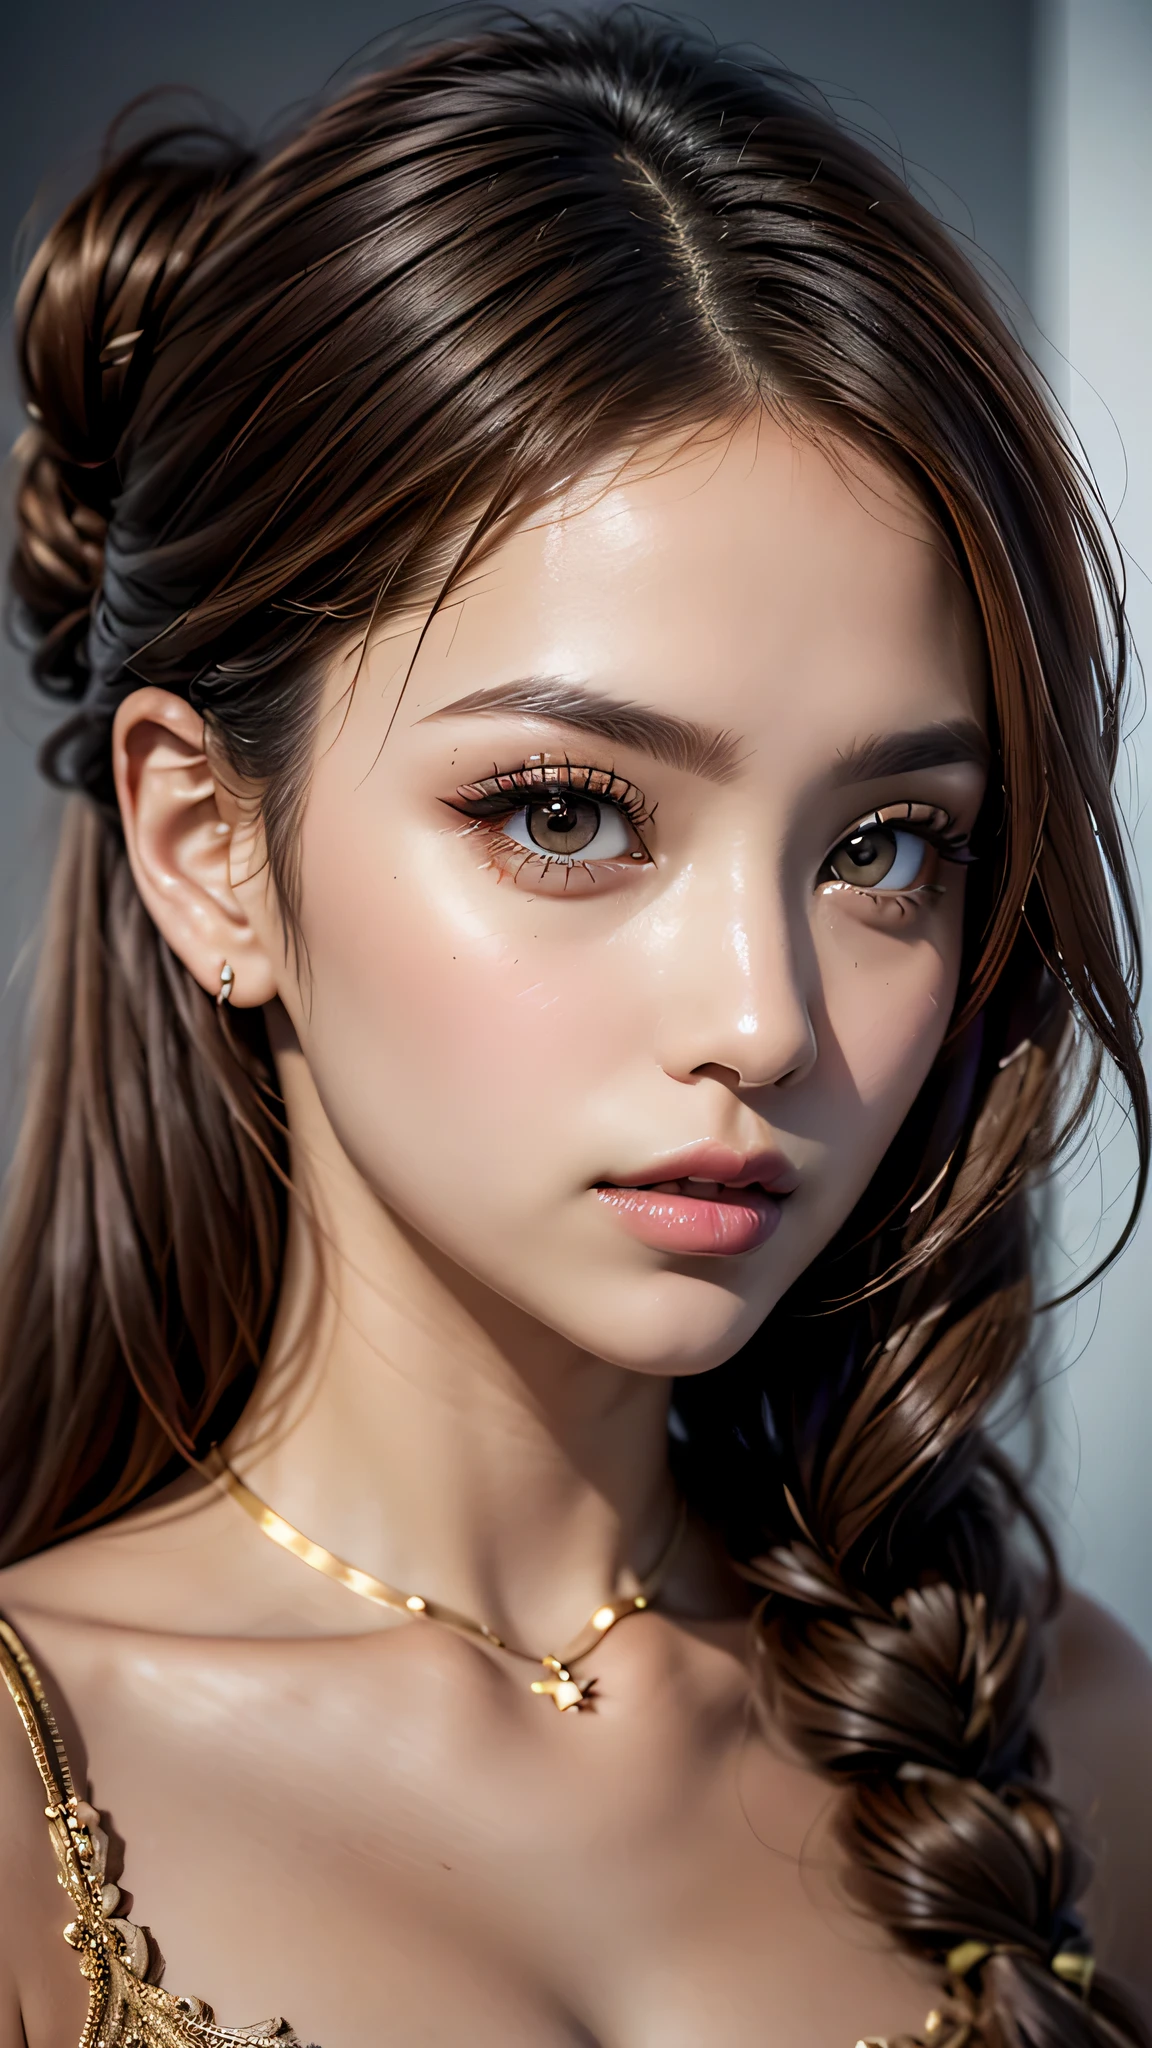 Ultra-realistic、 ultra-detailed primetime portraits、 最high quality、 8K, highest level、 The ultra -The high-definition)、(Super beautiful)、(beautiful face:1.5)、(detailed face:1.5)、(detailed eyes:1.2)、(detailed lips:1.35)、(Detailed nose:1.2)、1girl:1.4   22 years old、fashion supermodel、 real:1.55、photorealistic:1.55、very delicate and beautiful、fine detailasterpiece、 最high quality、 high quality、 High resolution、 (Glamour、 paparazzi taking pictures of her)、 (light、 side-braids low medium red hair、 extremely detailed)、 high contrast、 (dark shot:1.08)、 Long 2blue_eyelashes:1.4、 (dark_eyeshadows:1.25)、 ((Glossy)) red_lipstick:1.45、(perfect round eyes)、 ((brown_eyes:1.3))、 (dark_makeup:1.3)、(tanned matte skin:1.2)、 ((upper body shot))